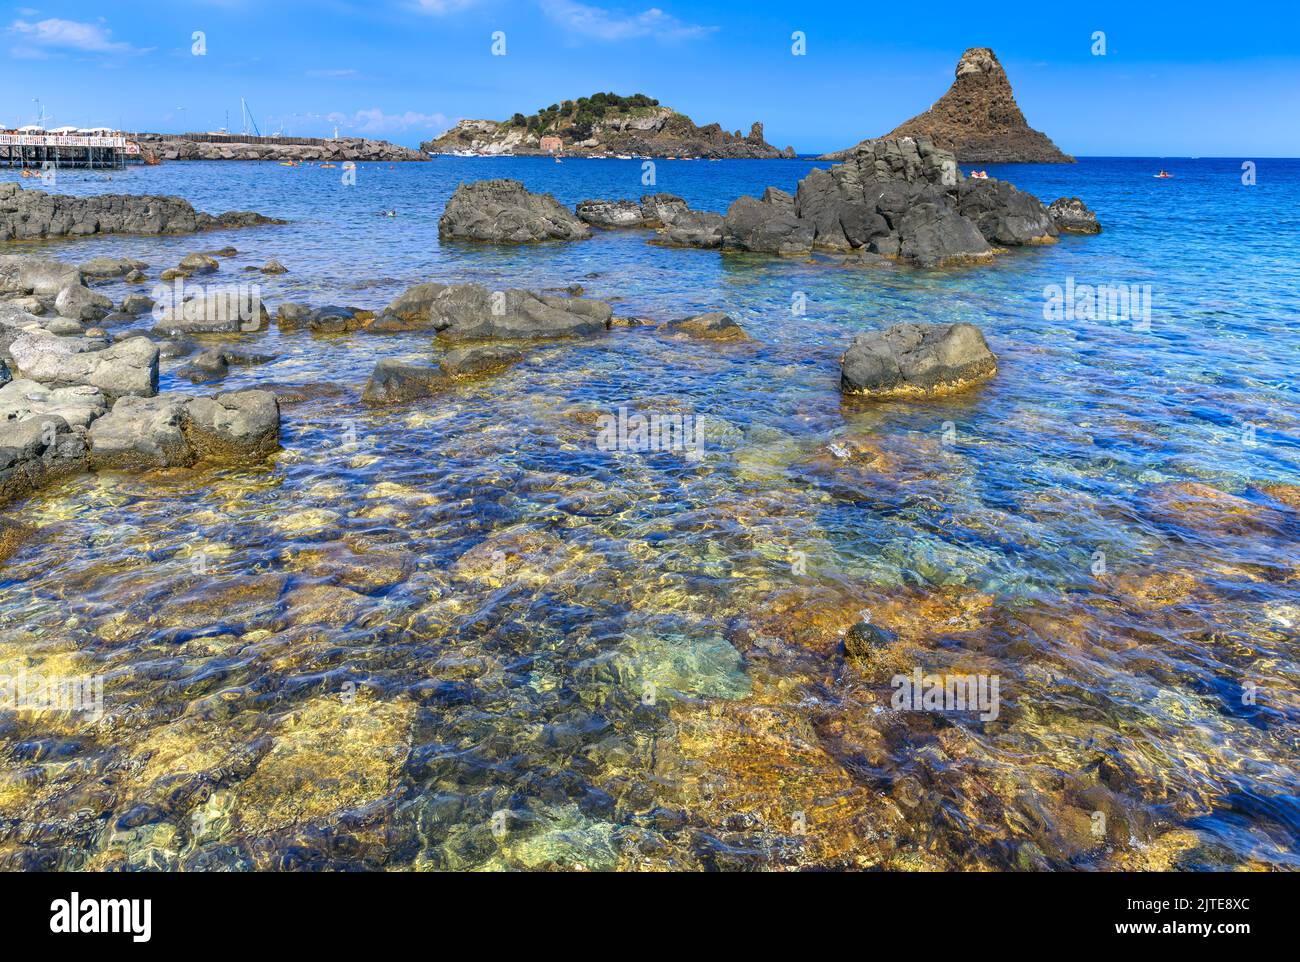 Cyclopean Isles, Aci Trezza, Sicily, Italy. These were the great stones thrown at Odysseus by the monster Cyclops in the epic poem 'The Odyssey.' Stock Photo